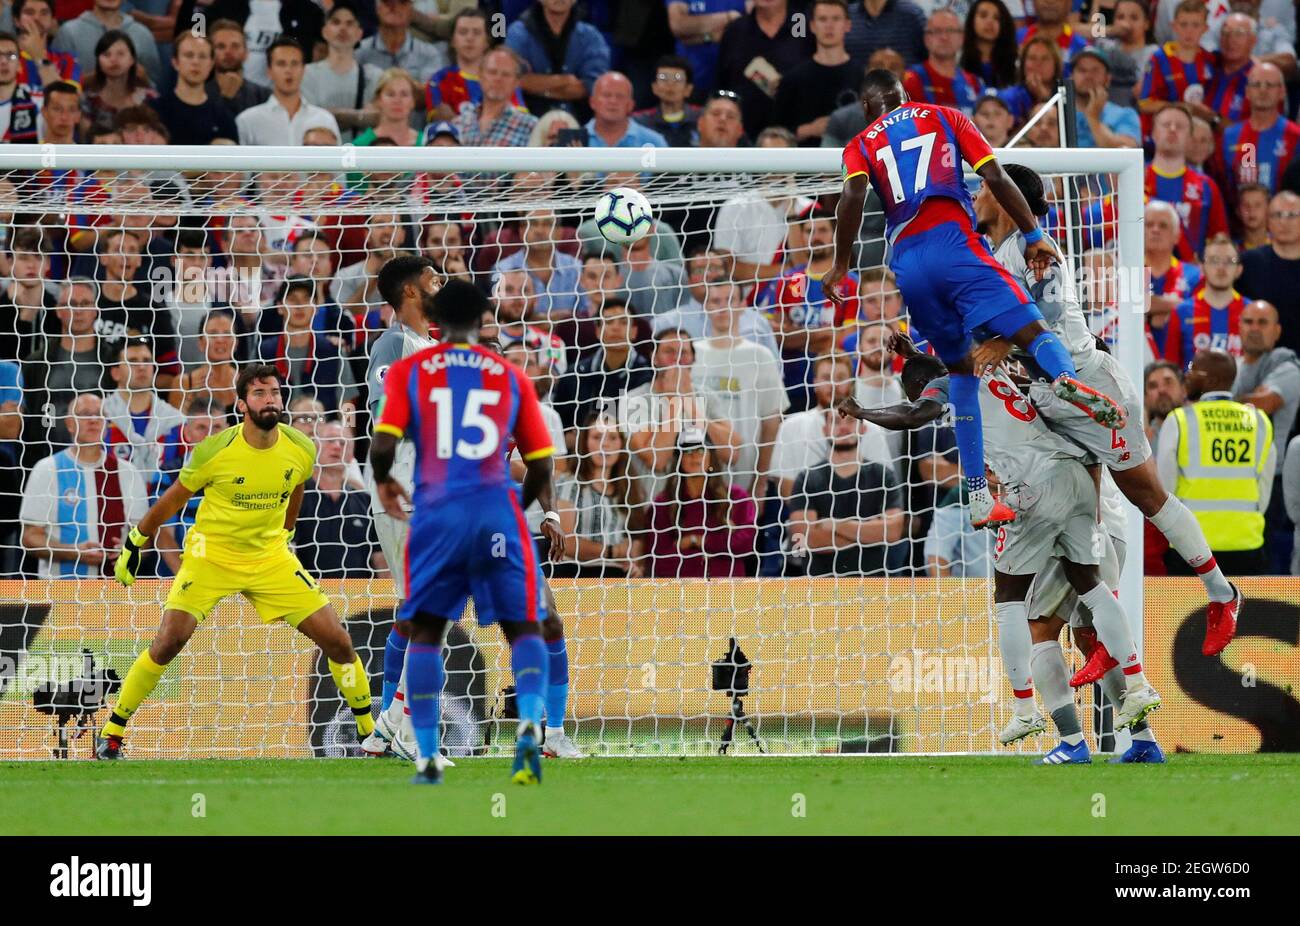 Soccer Football - Premier League - Crystal Palace v Liverpool - Selhurst Park, London, Britain - August 20, 2018  Crystal Palace's Christian Benteke heads at goal                     REUTERS/Eddie Keogh  EDITORIAL USE ONLY. No use with unauthorized audio, video, data, fixture lists, club/league logos or "live" services. Online in-match use limited to 75 images, no video emulation. No use in betting, games or single club/league/player publications.  Please contact your account representative for further details. Stock Photo